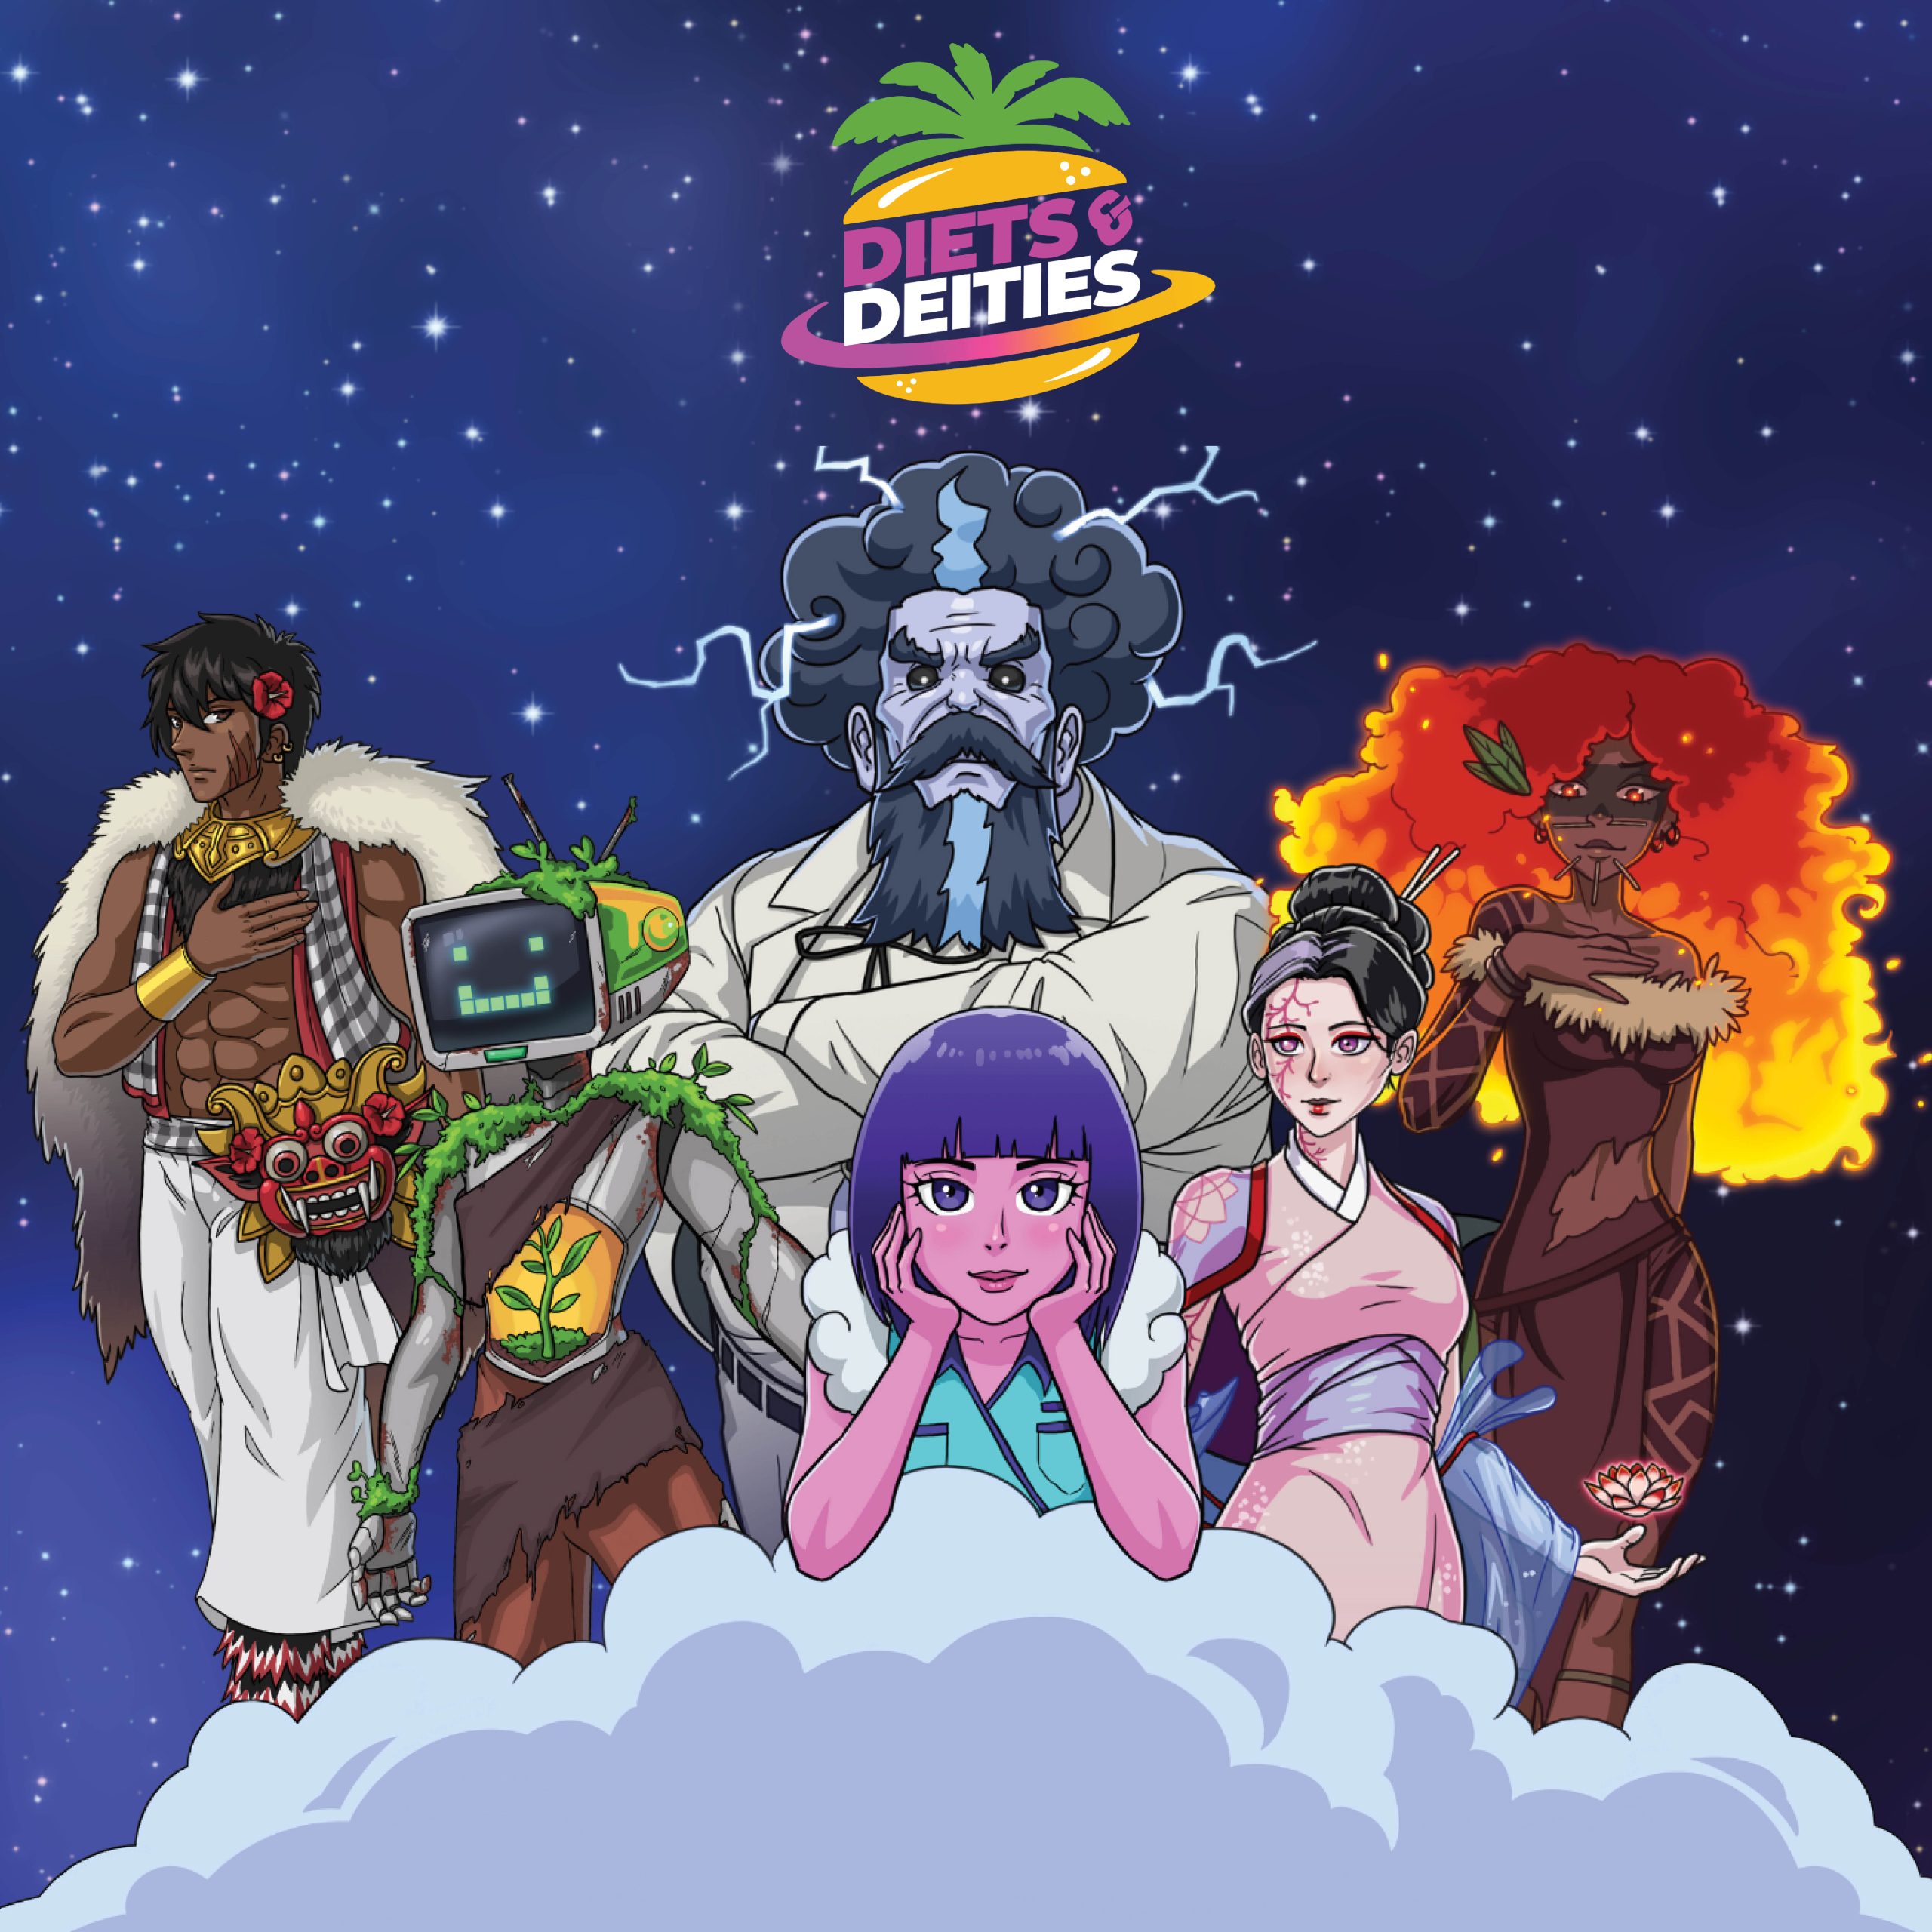 Illustration of game characters with the 'Diets and Deities' logo at the top